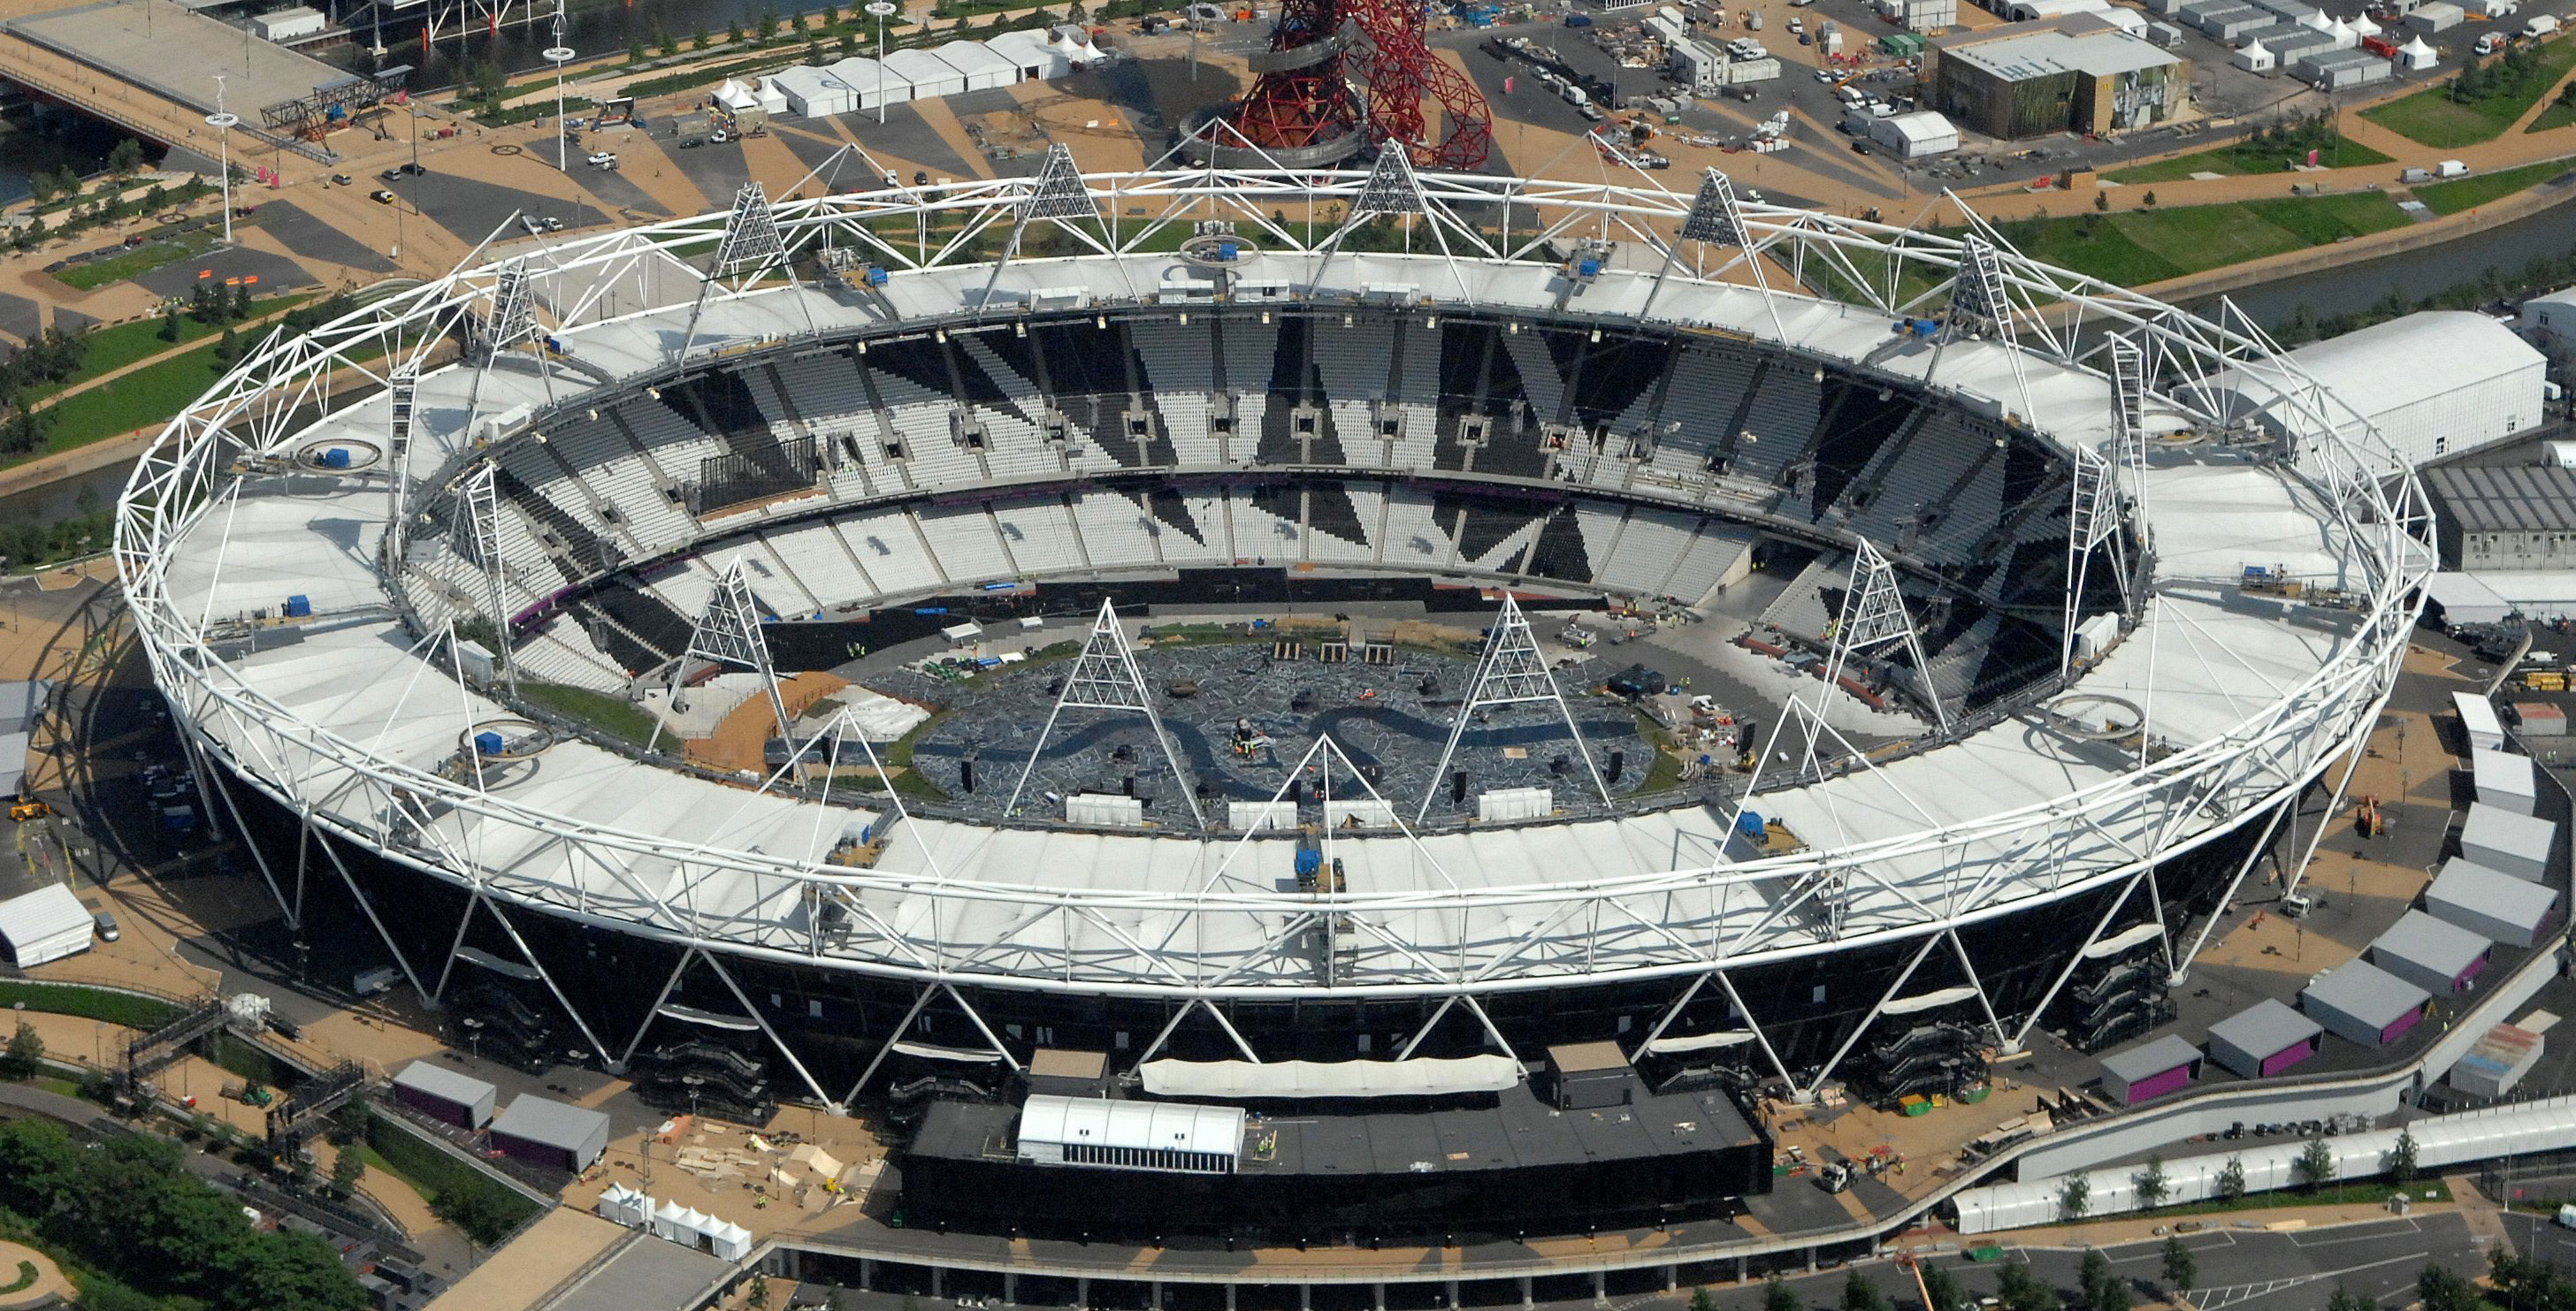 London's Olympic Stadium has been put forward as a venue for the 2015 World Cup.